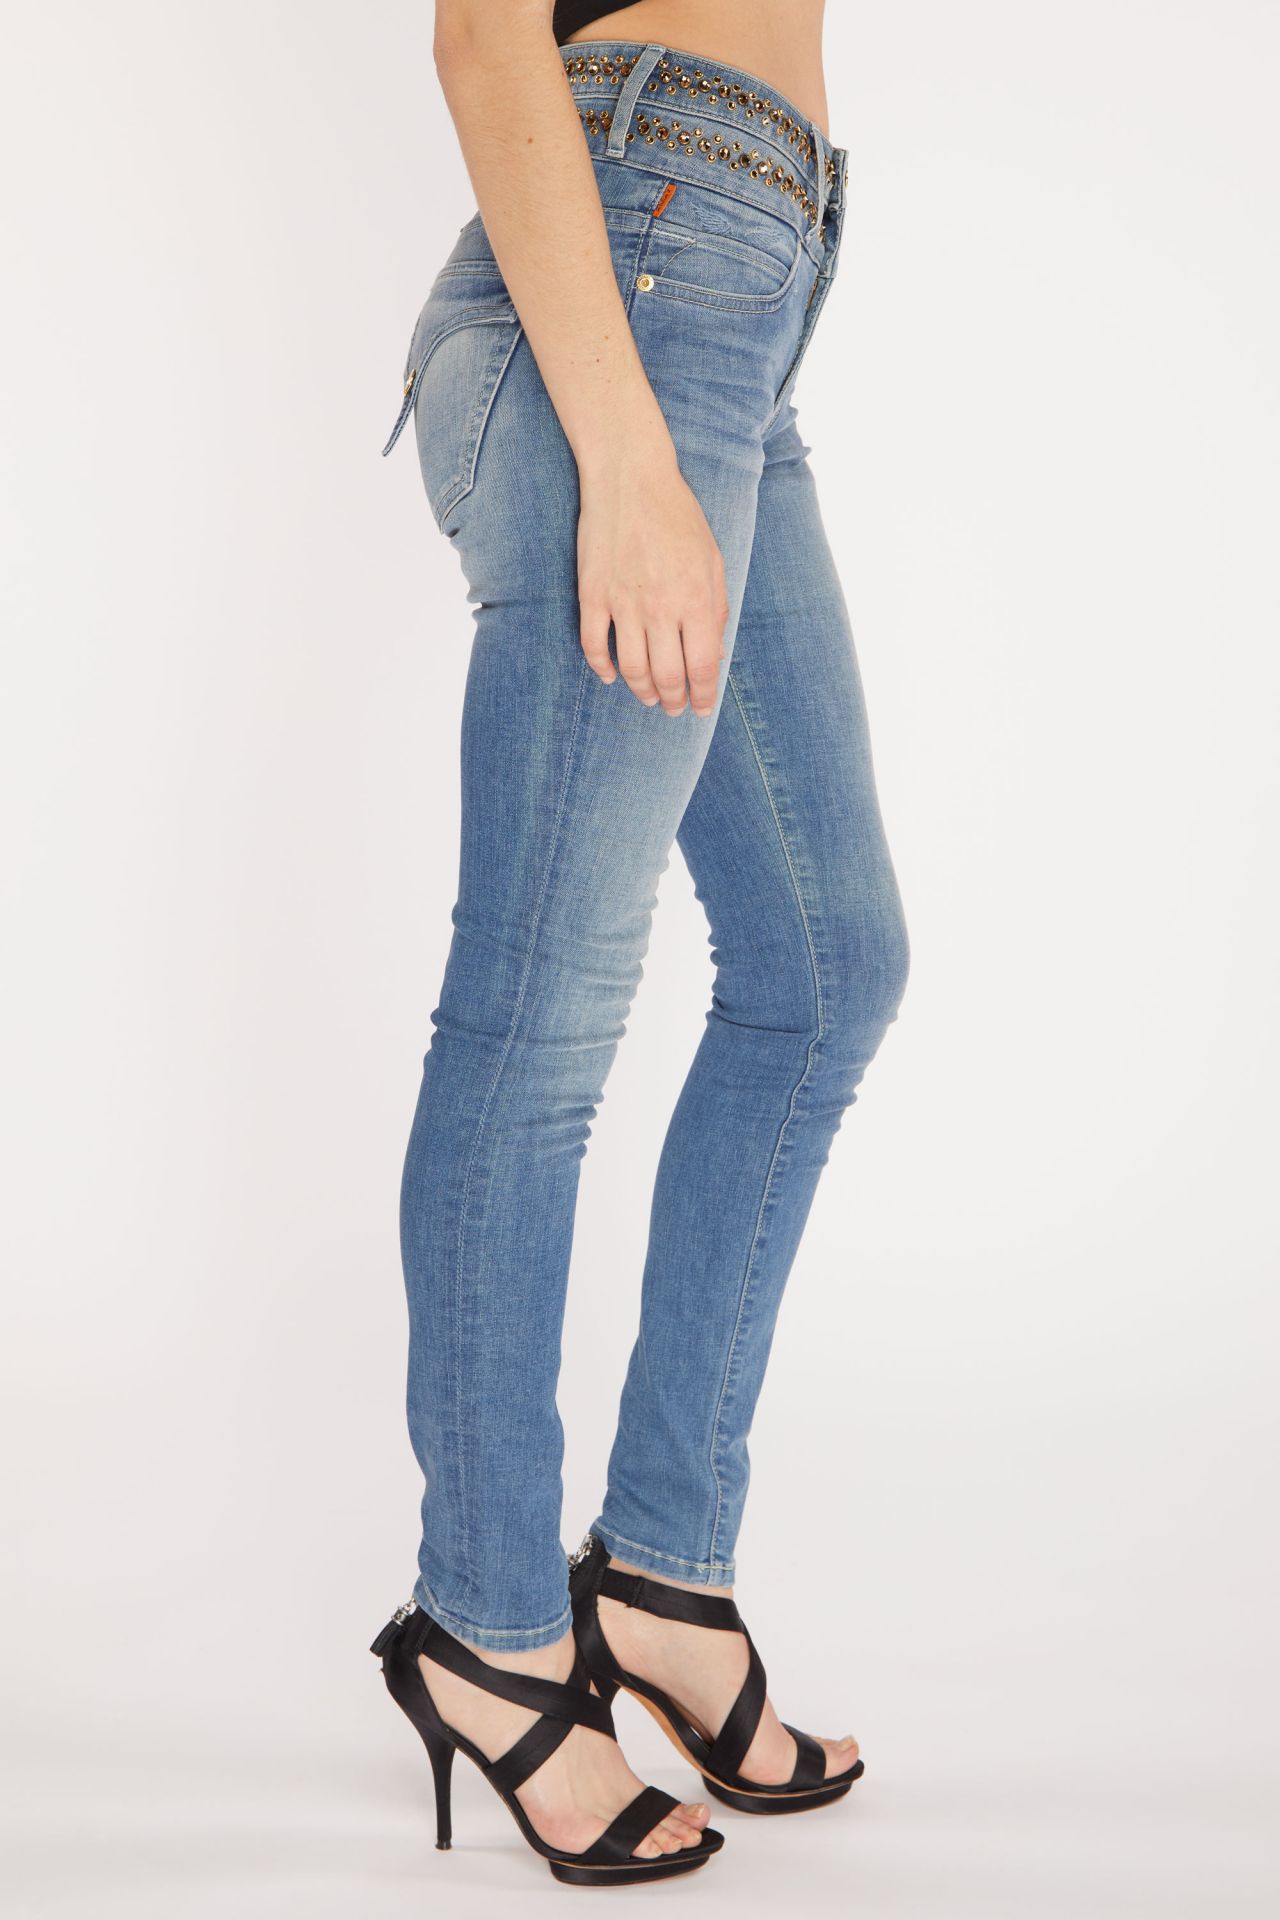 WOMENS KILLER FLAP DOUBLE WAIST HIGH RISE SKINNY JEANS IN ELROY MEDIUM WITH STUDS AND CRYSTALS